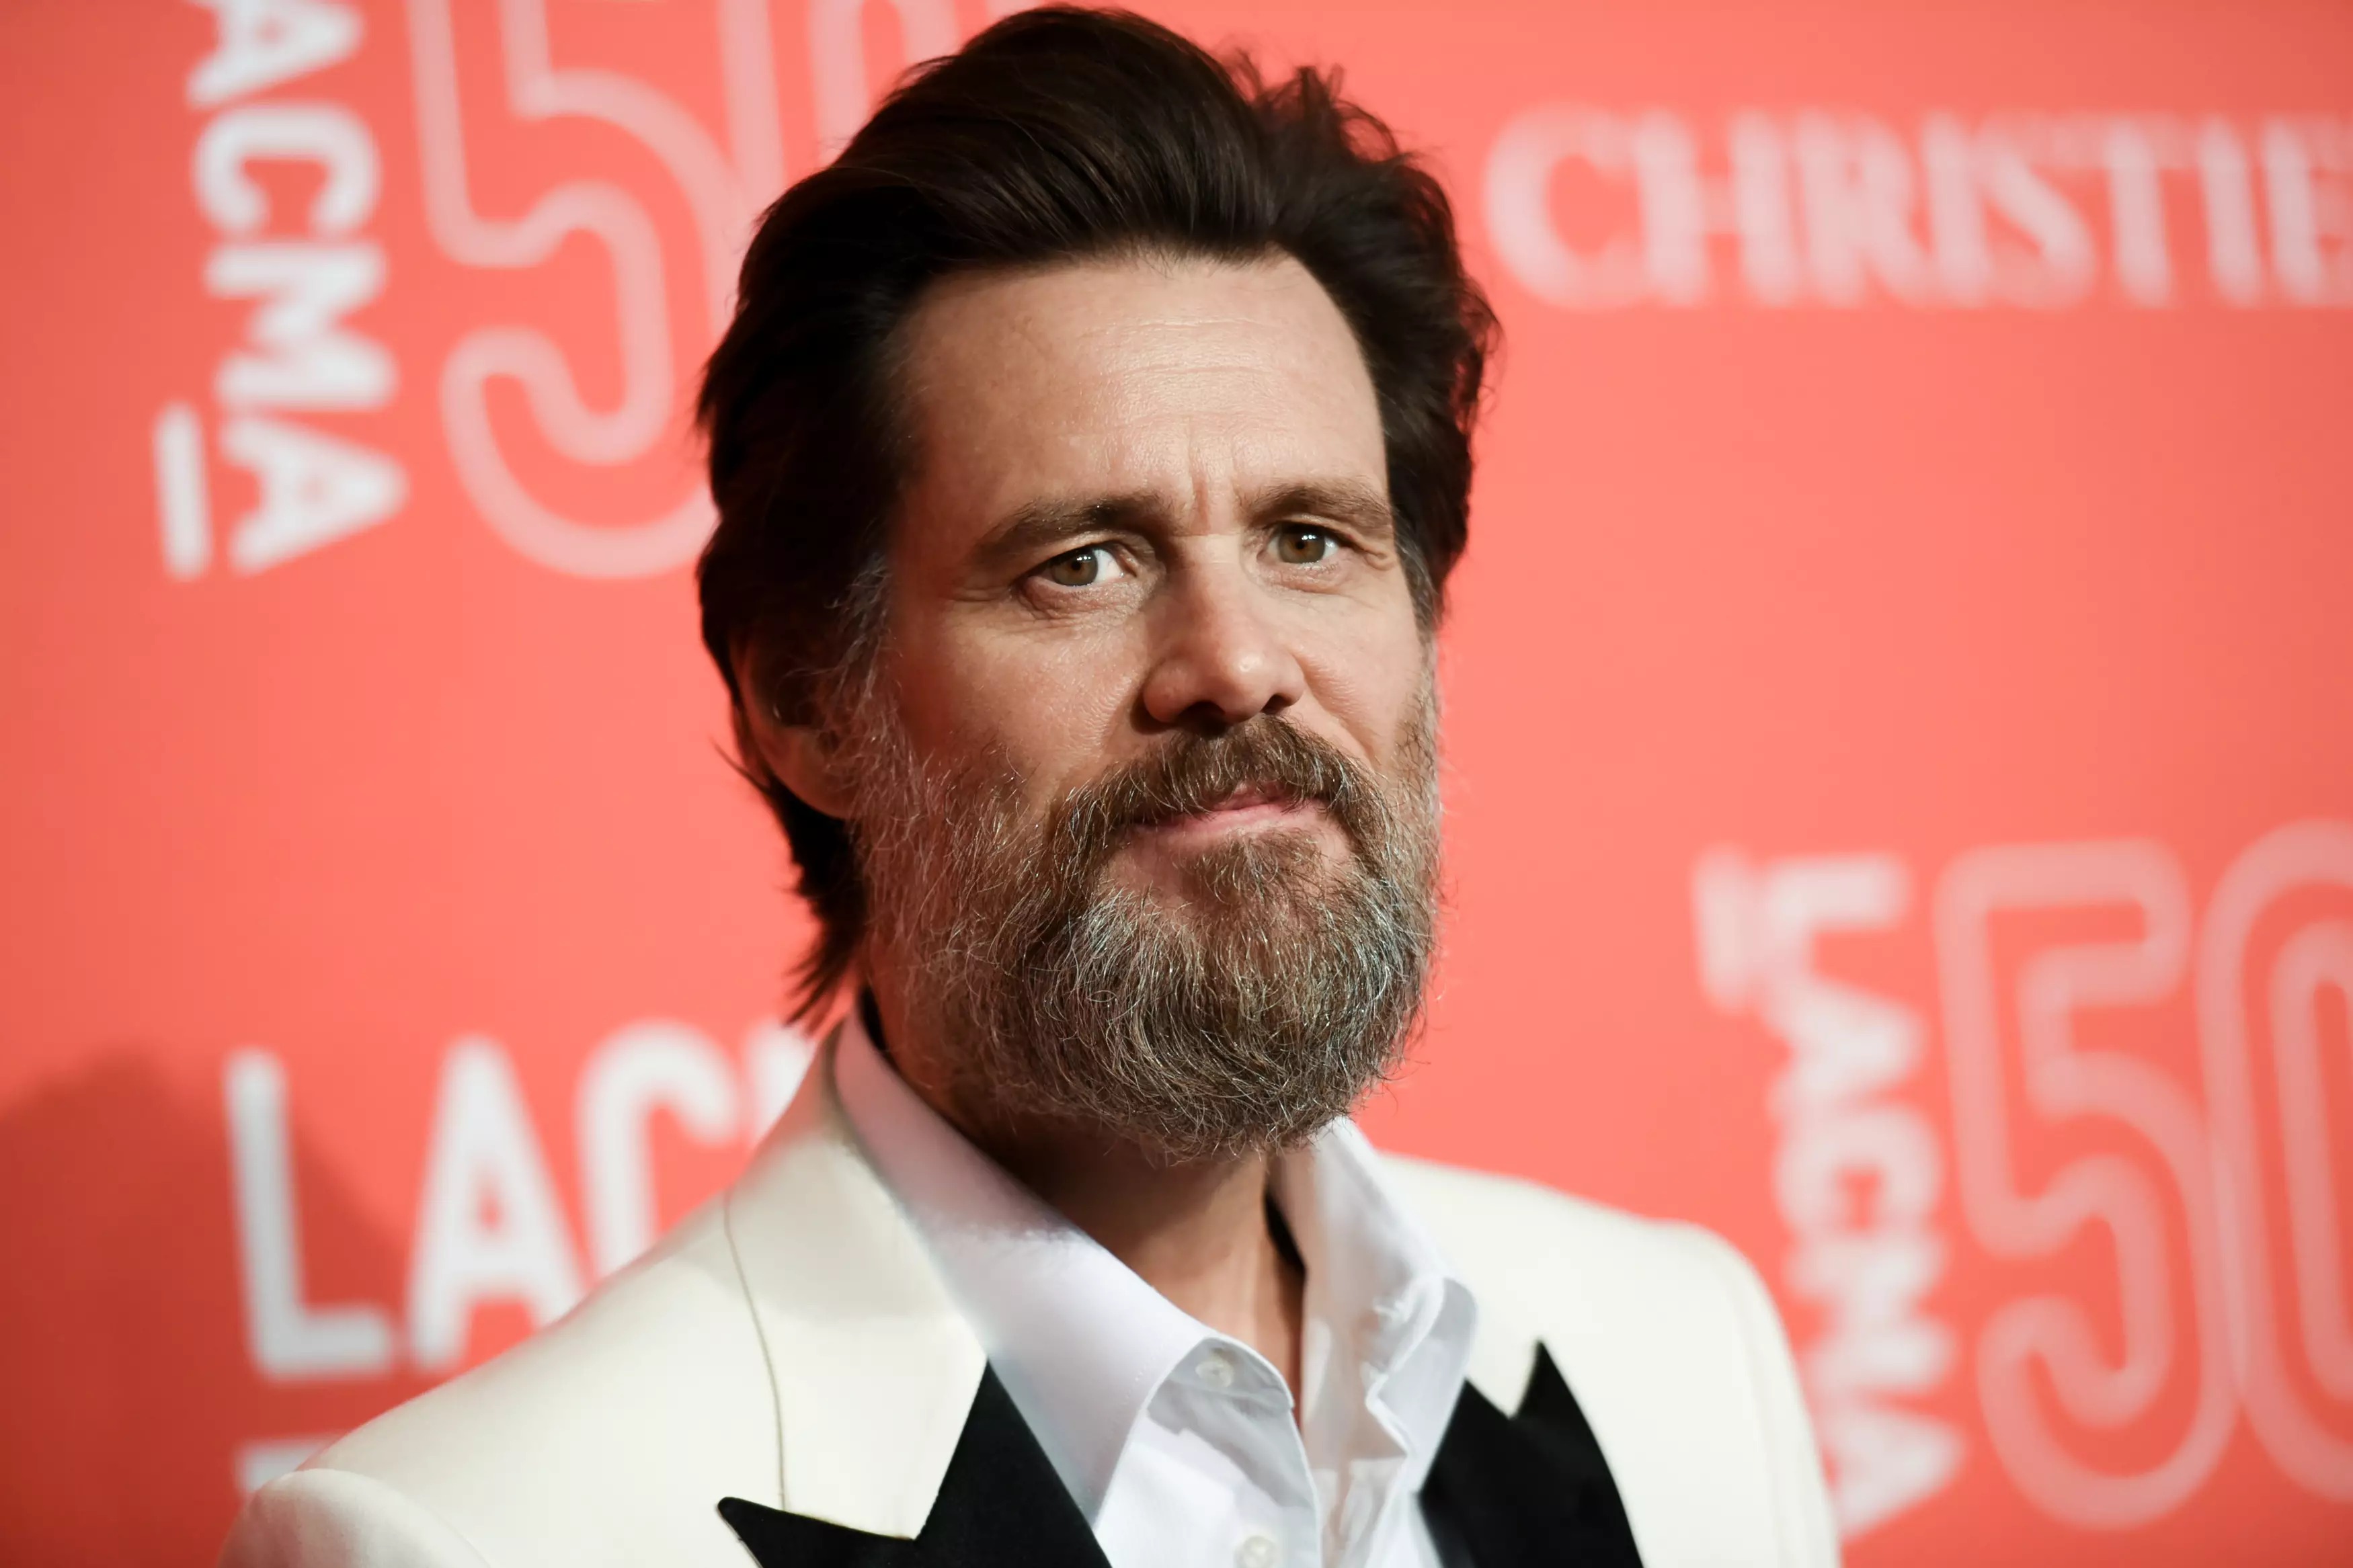 Jim Carrey Dines With Friends In Trendy NYC Restaurant, Leaves Sick Tip